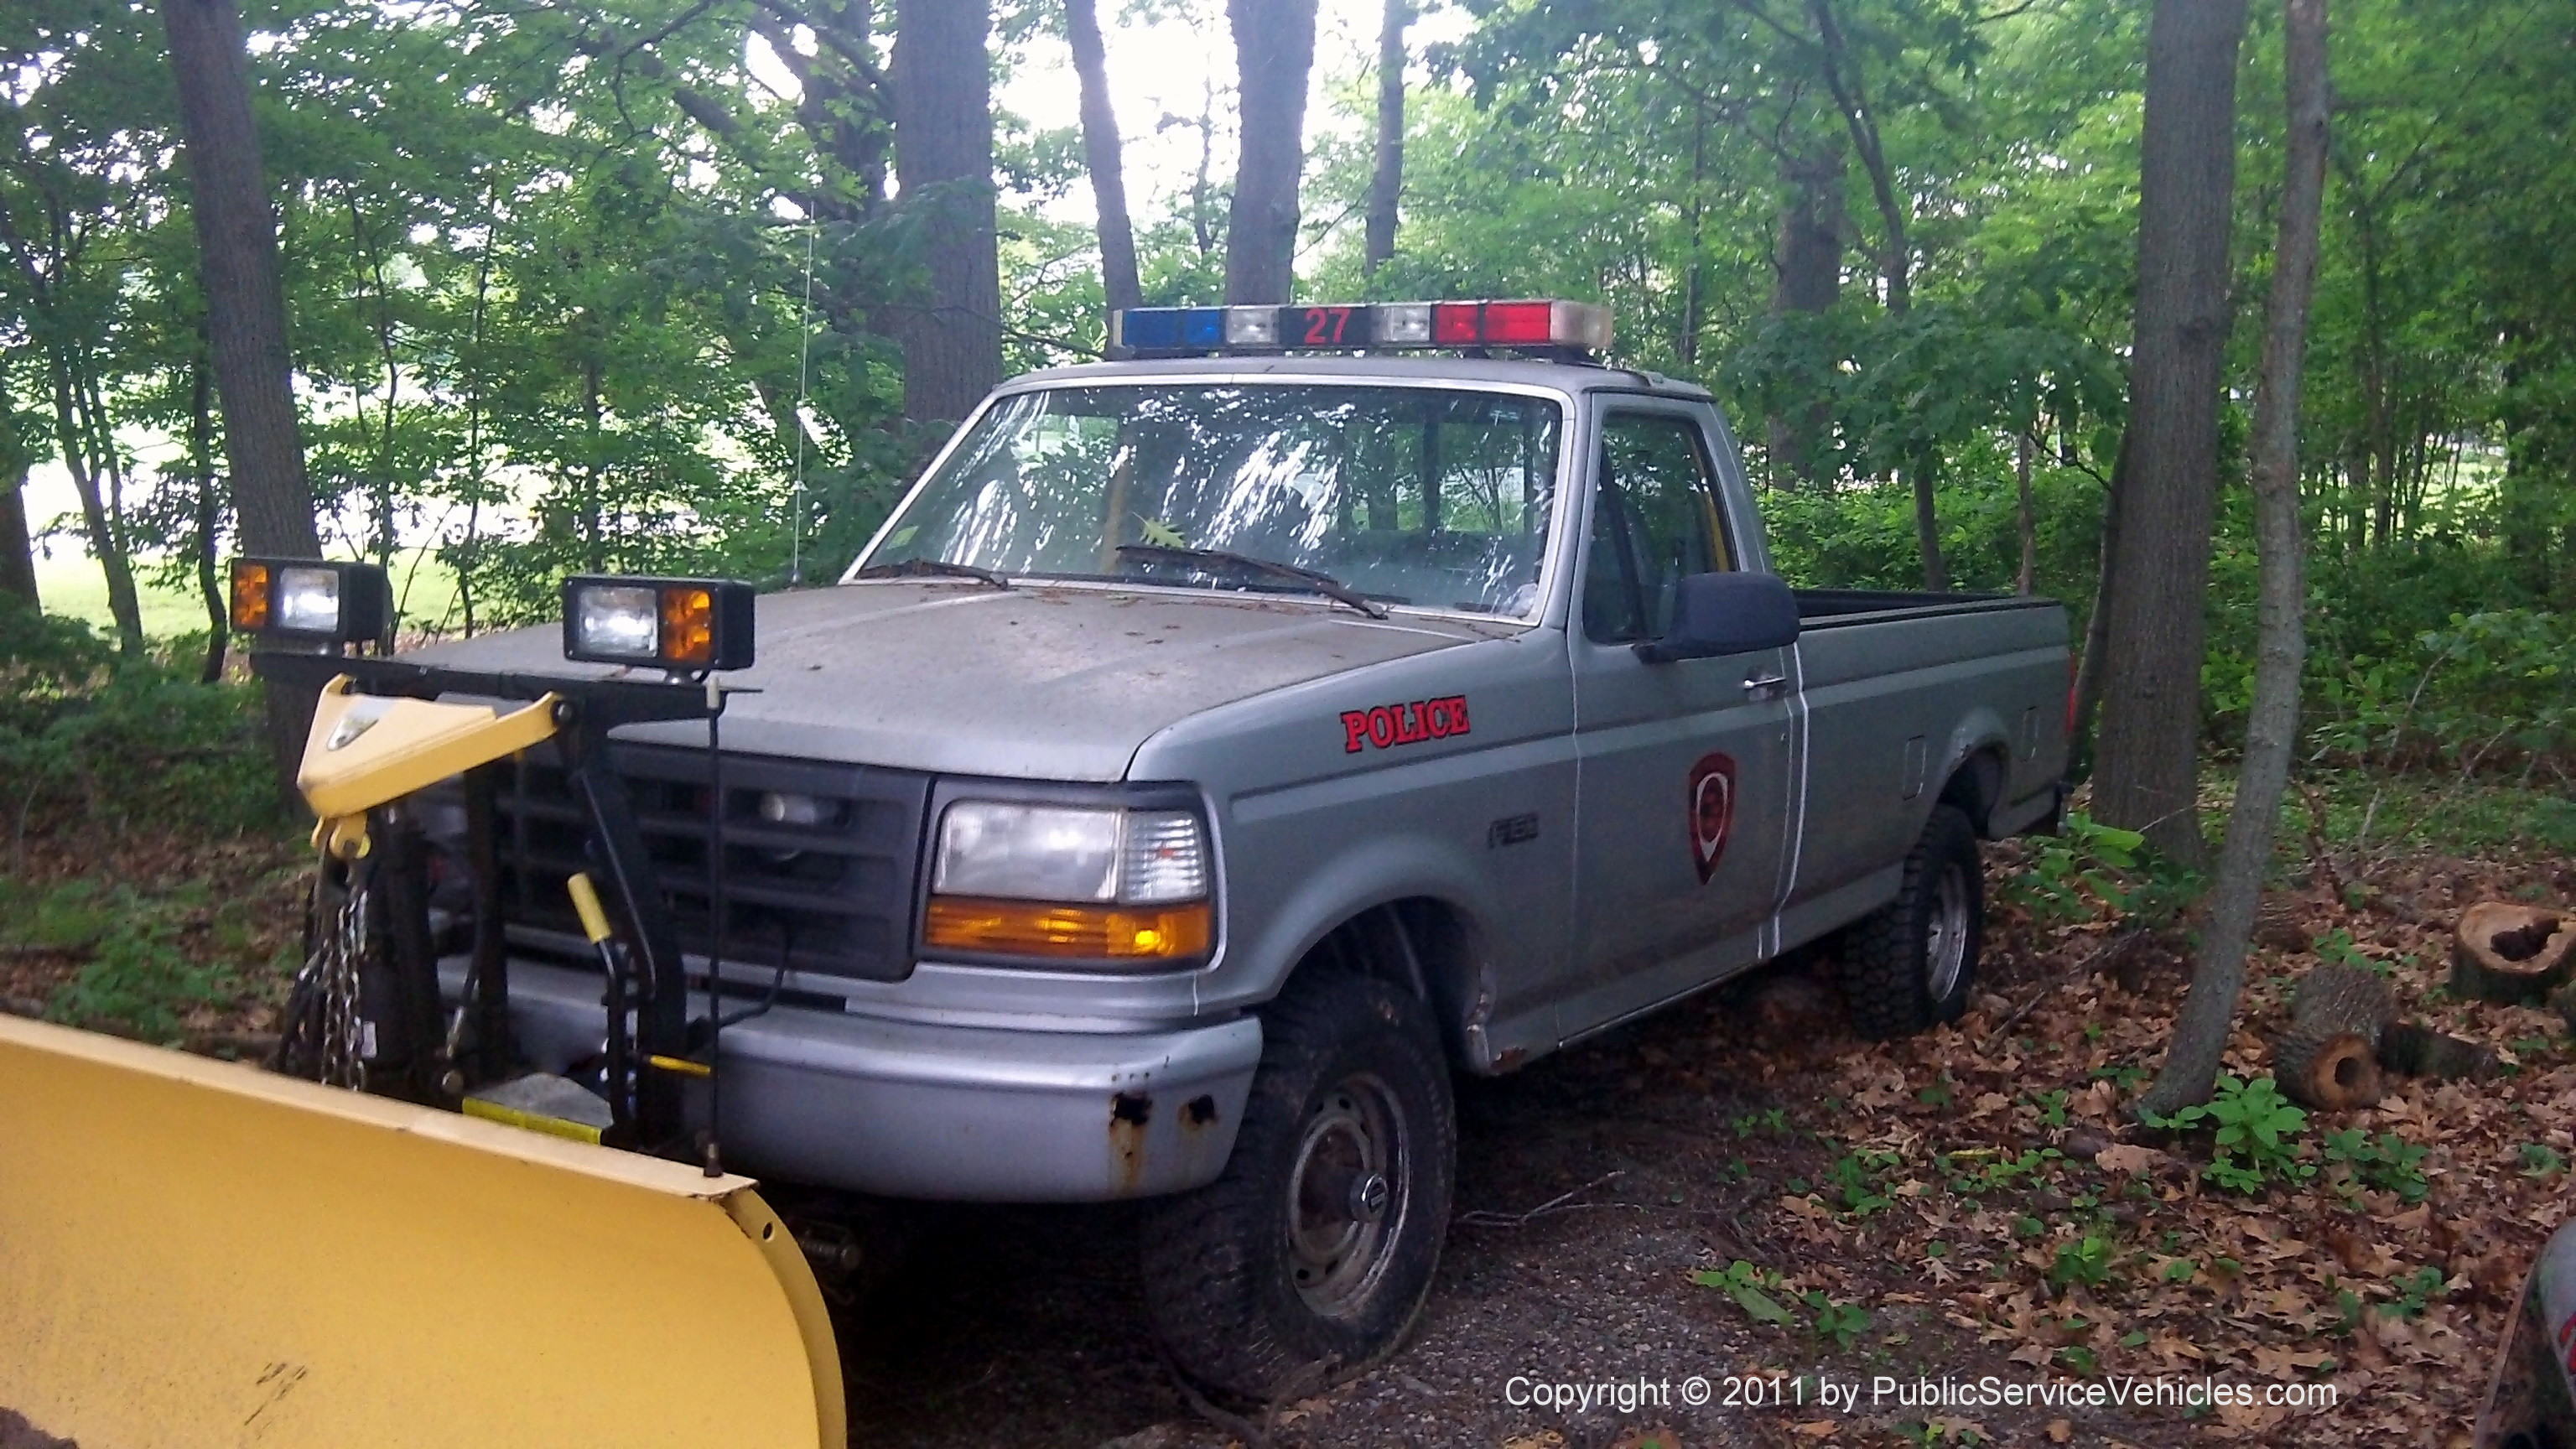 A photo  of East Providence Police
            Truck 27, a 1992-1997 Ford F-150             taken by Kieran Egan